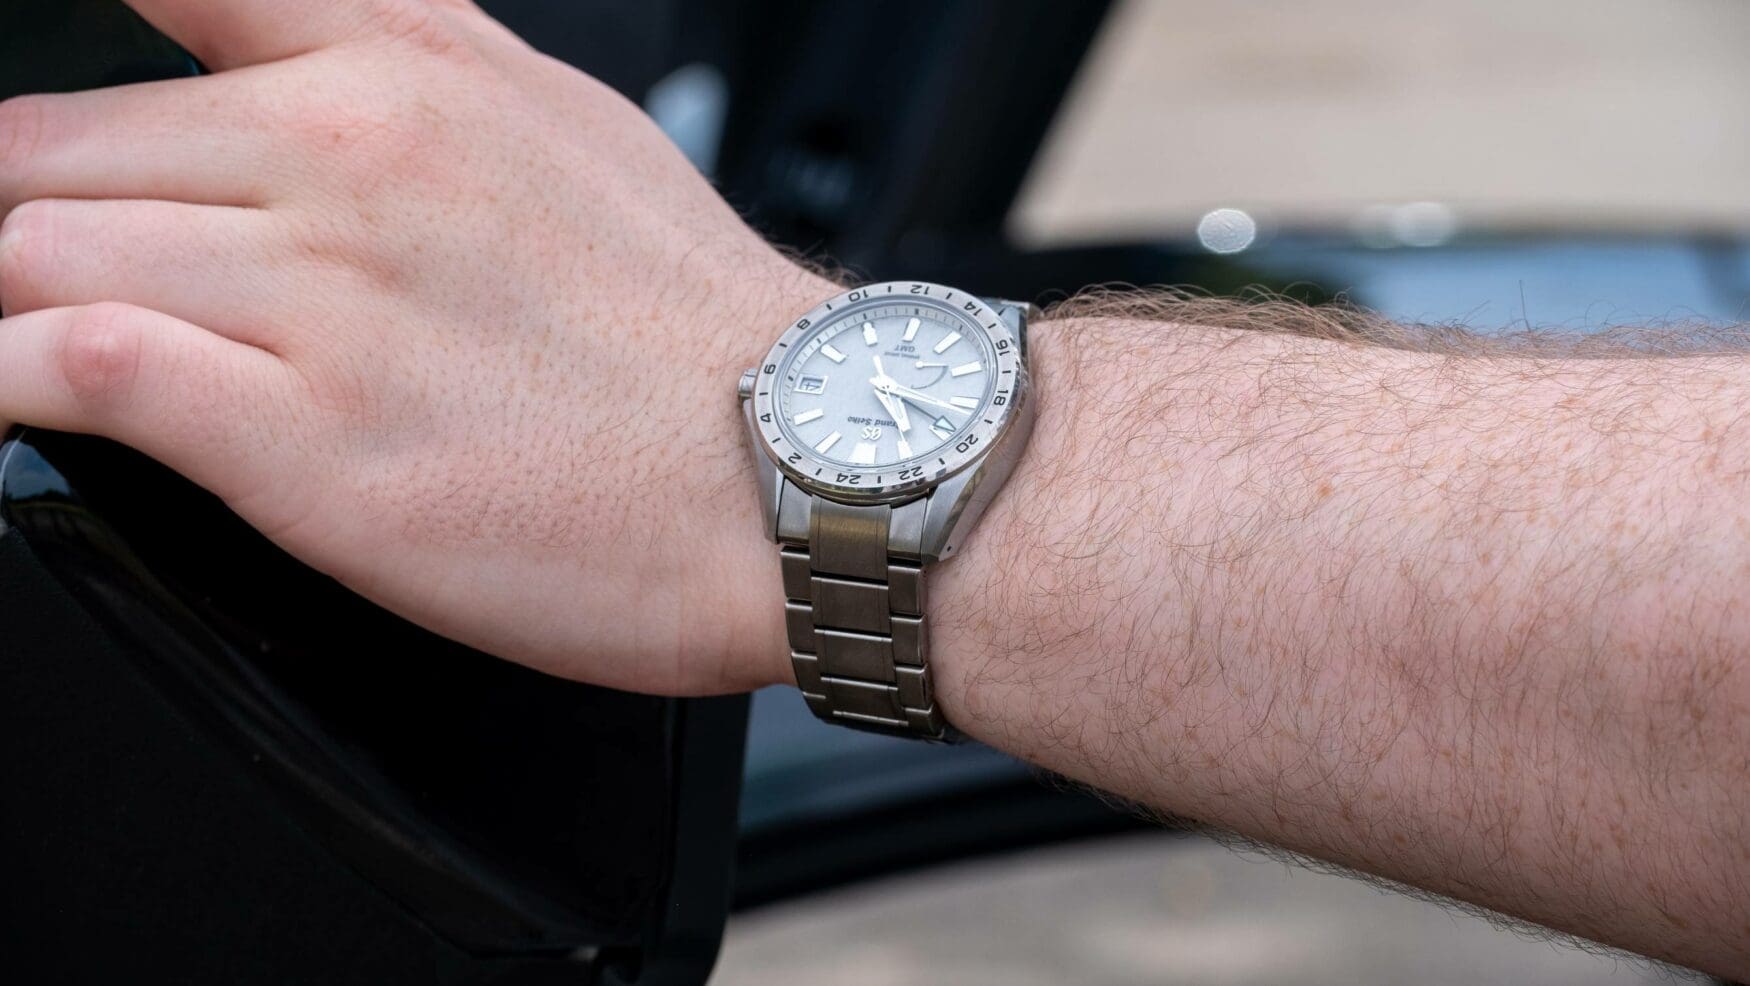 Living the jet set lifestyle for a day with the Grand Seiko SBGE285 Spring Drive GMT